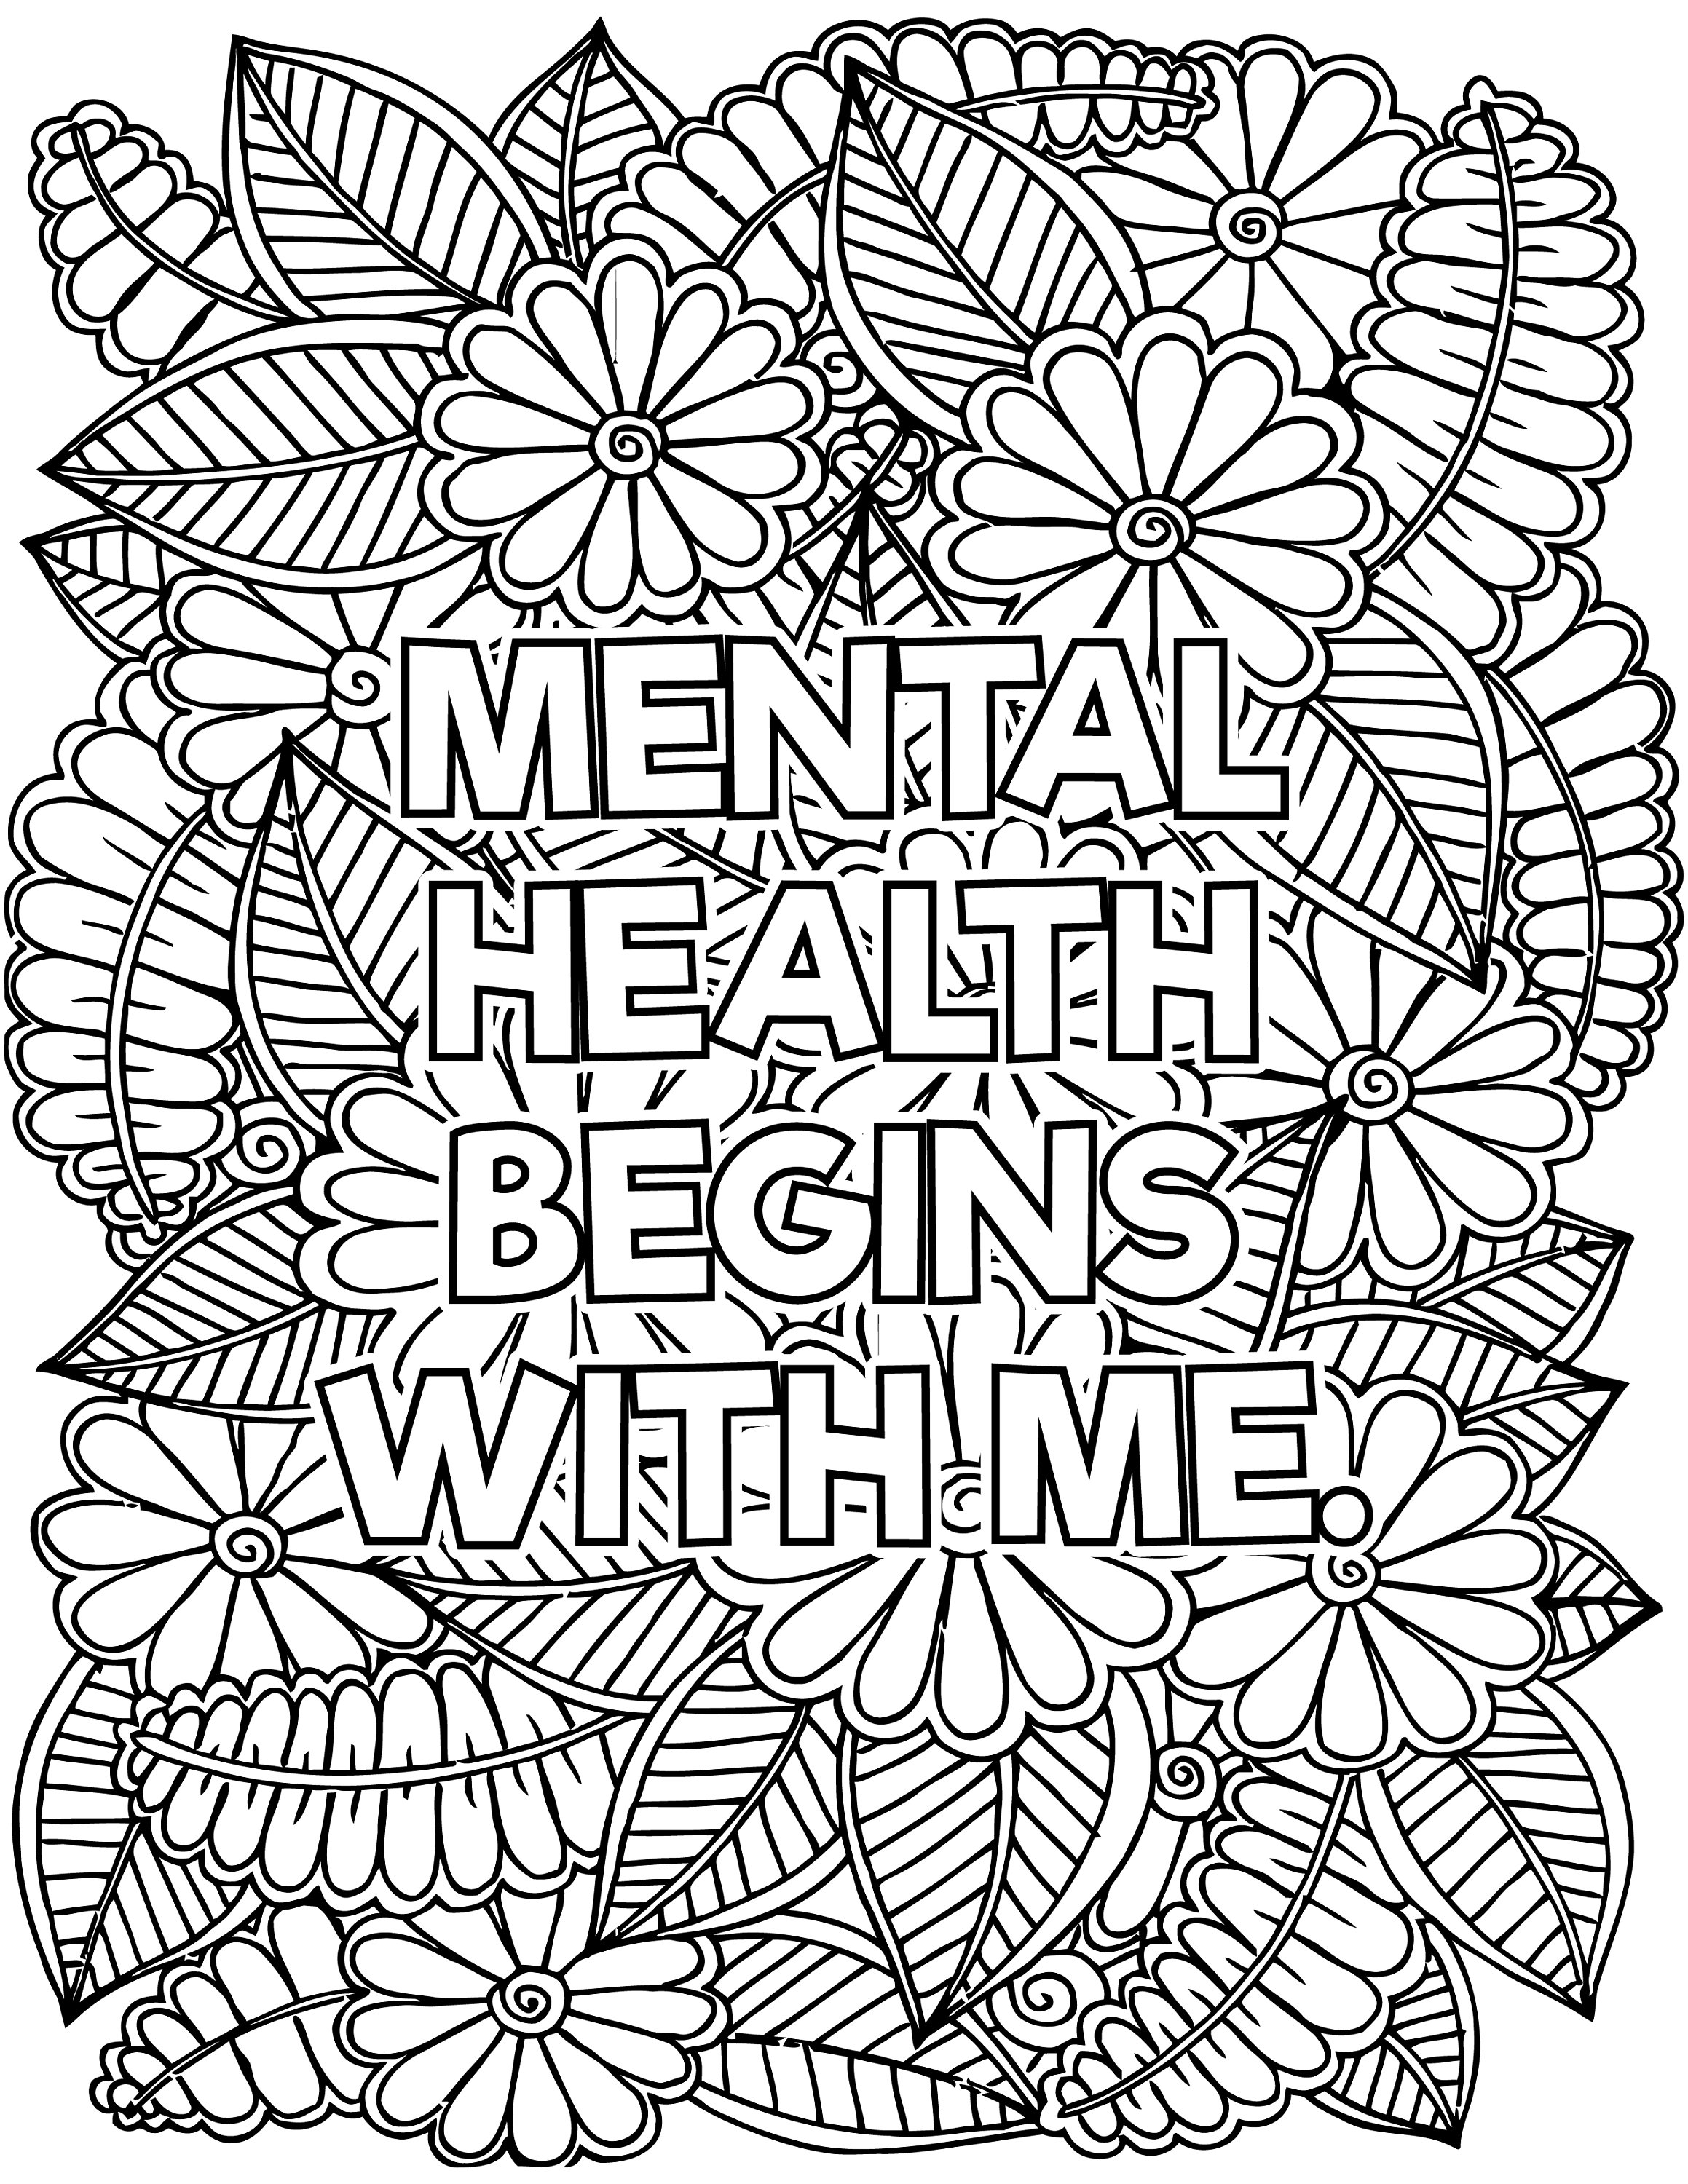 10 Mental Health AFFIRMATIONS Coloring Book Pages | Etsy